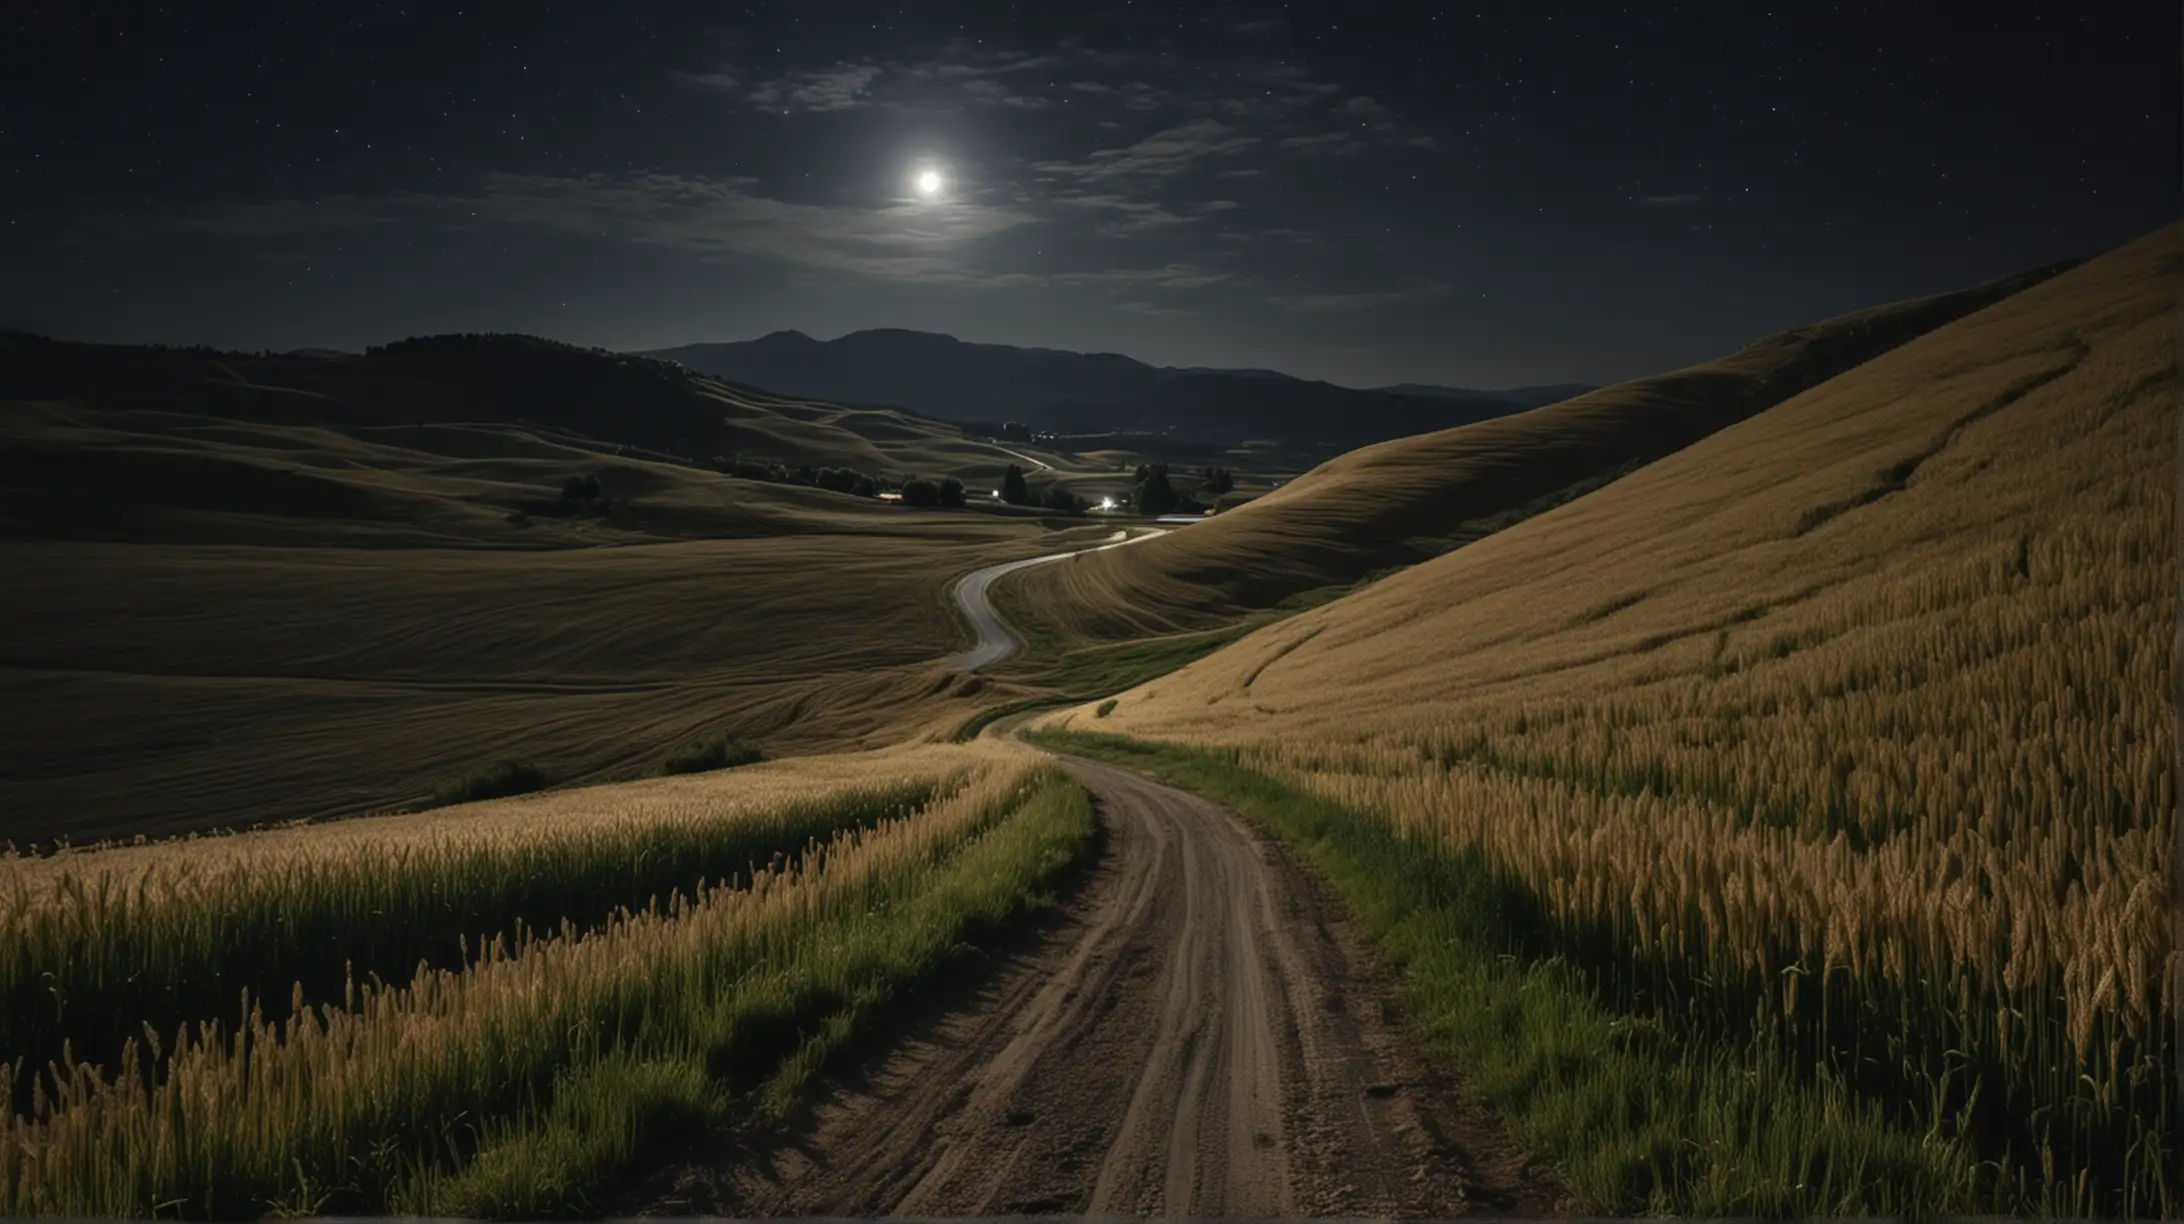 Curving Road Through Hills at Night with Wheat Field